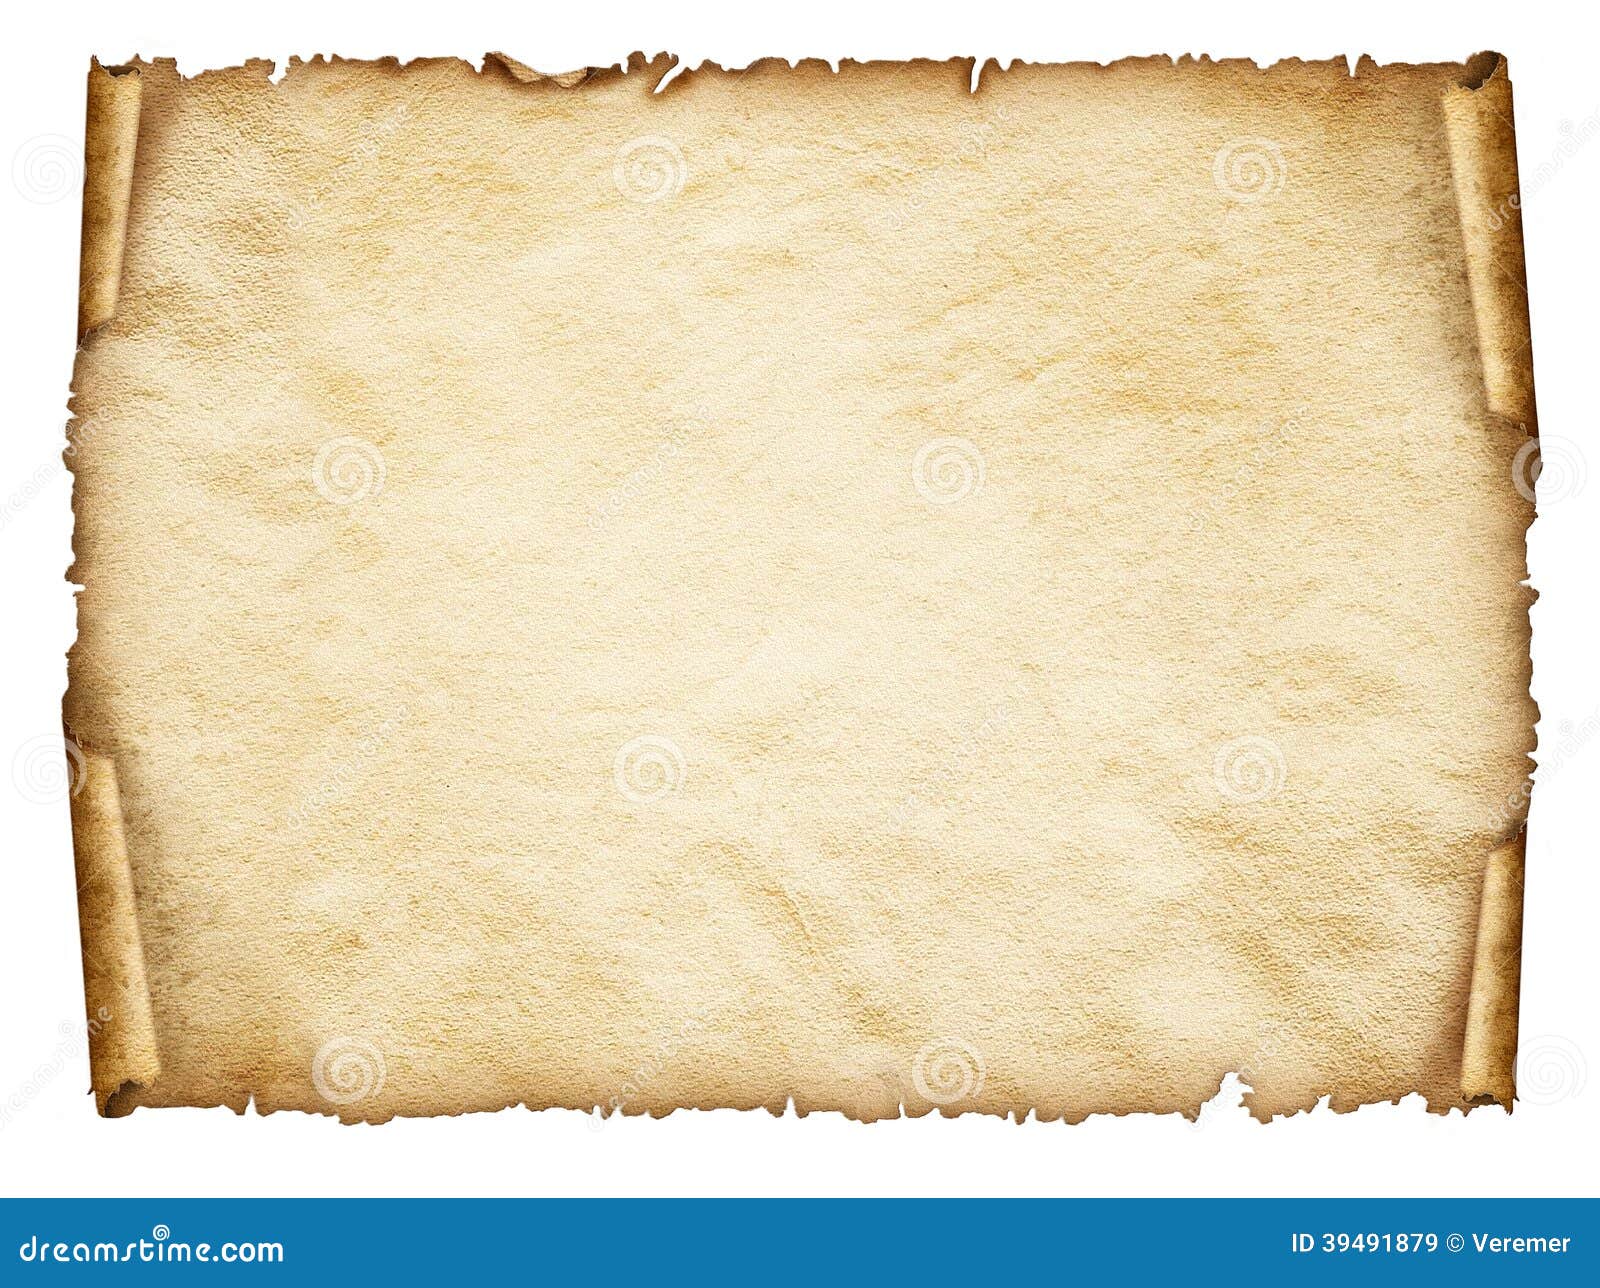 Old paper grunge background Stock Photo by ©silverjohn 7825231